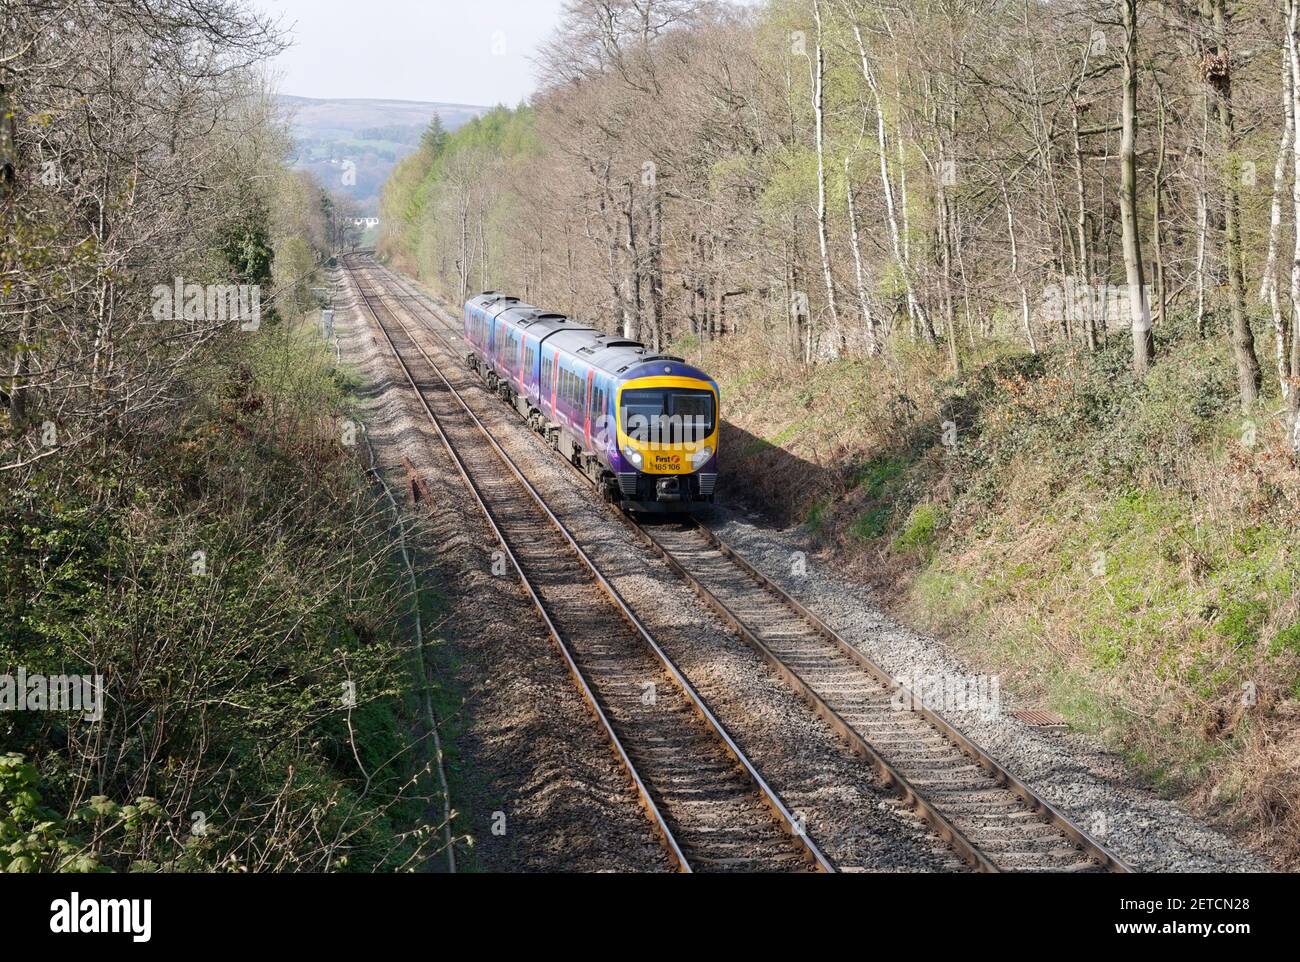 First trans pennine express passenger train passing through Grindleford in Derbyshire England UK, Hope valley line Stock Photo